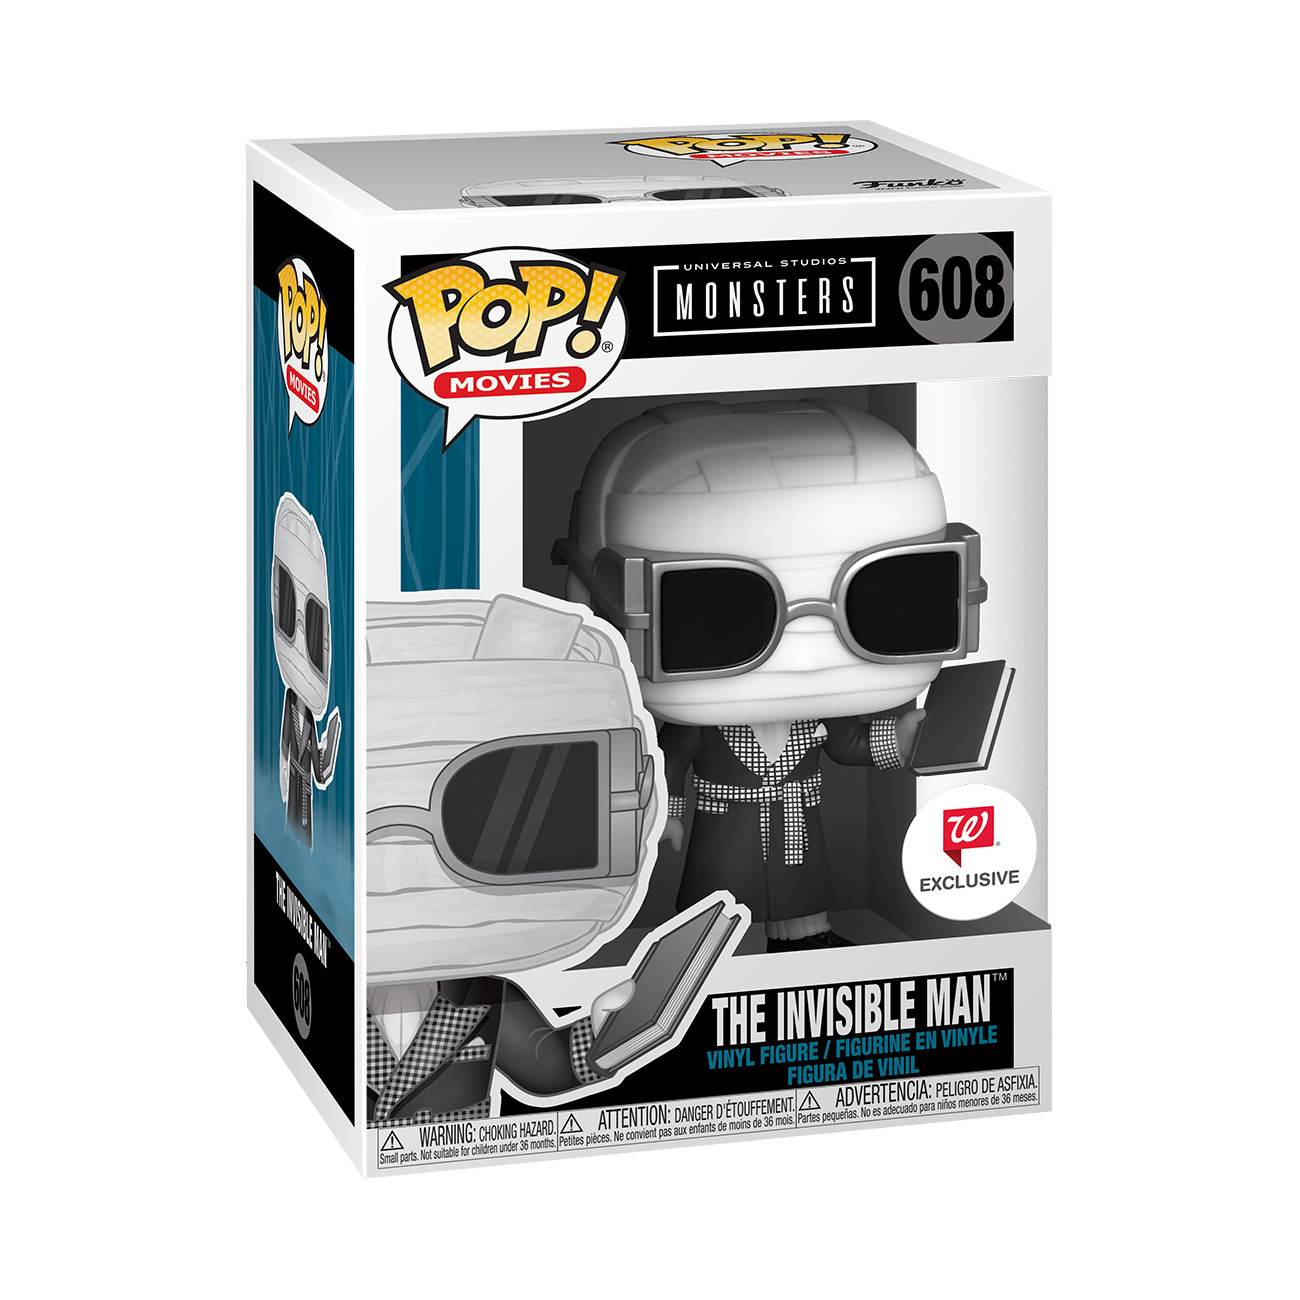 Funko Pop Vinyl: Universal Monsters - The Invisible Man - Walgreens (Exclusive)